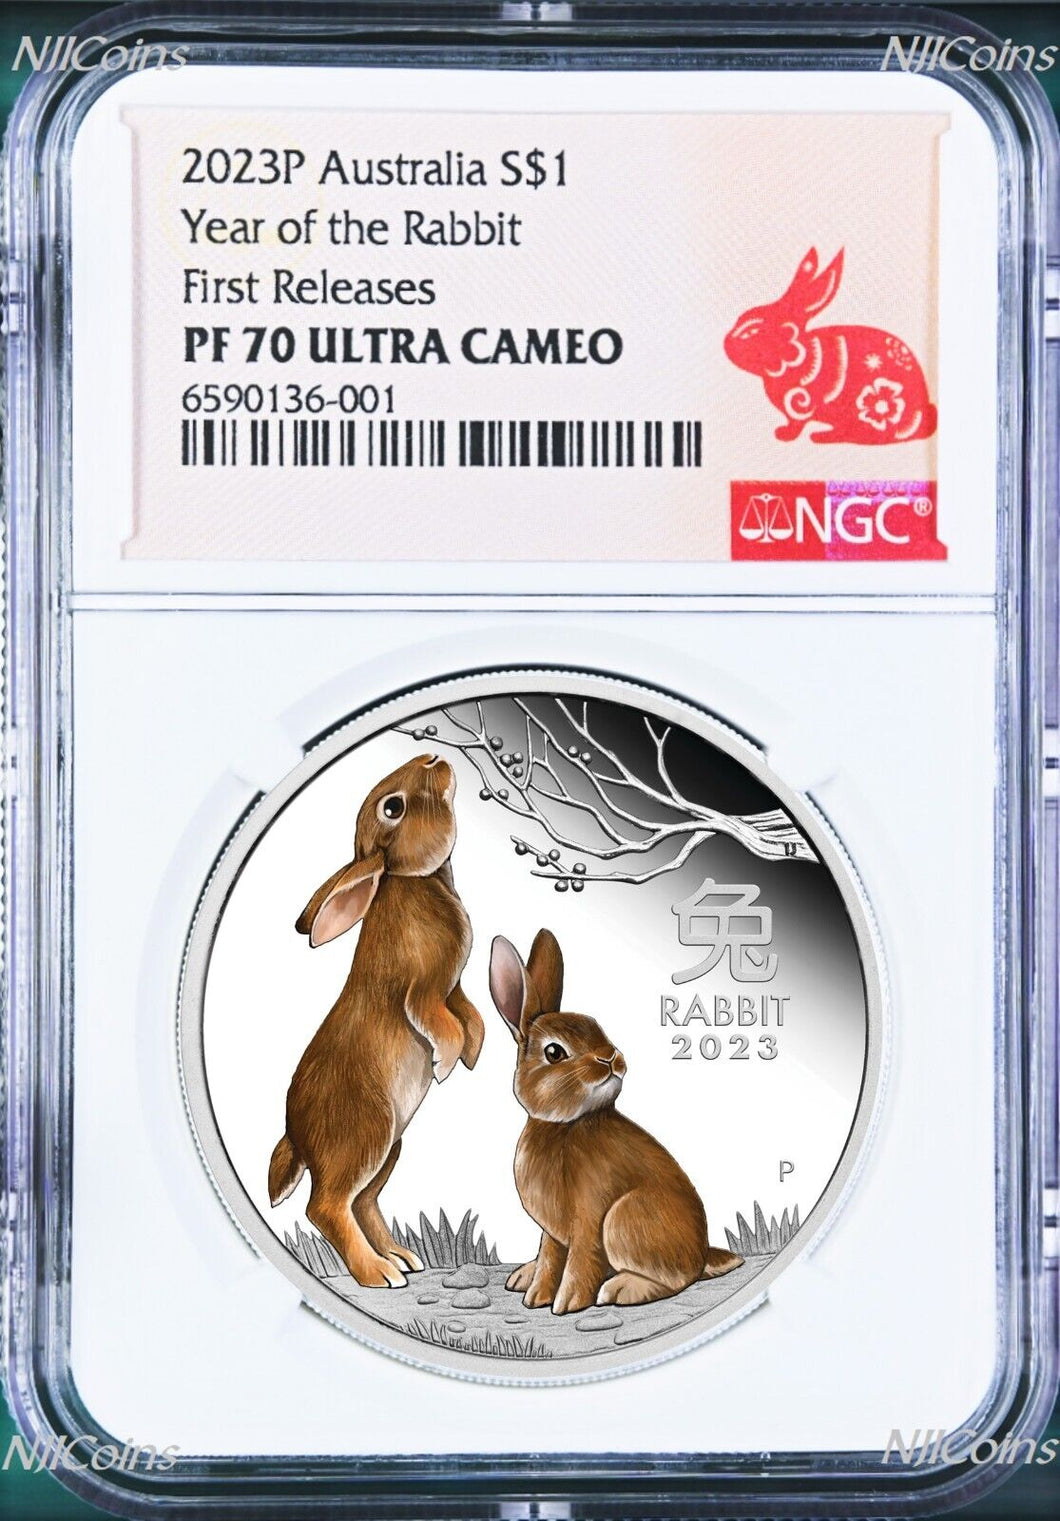 2023 Australia PROOF Colored Silver Lunar Year of the RABBIT NGC PF70 1oz Coin F